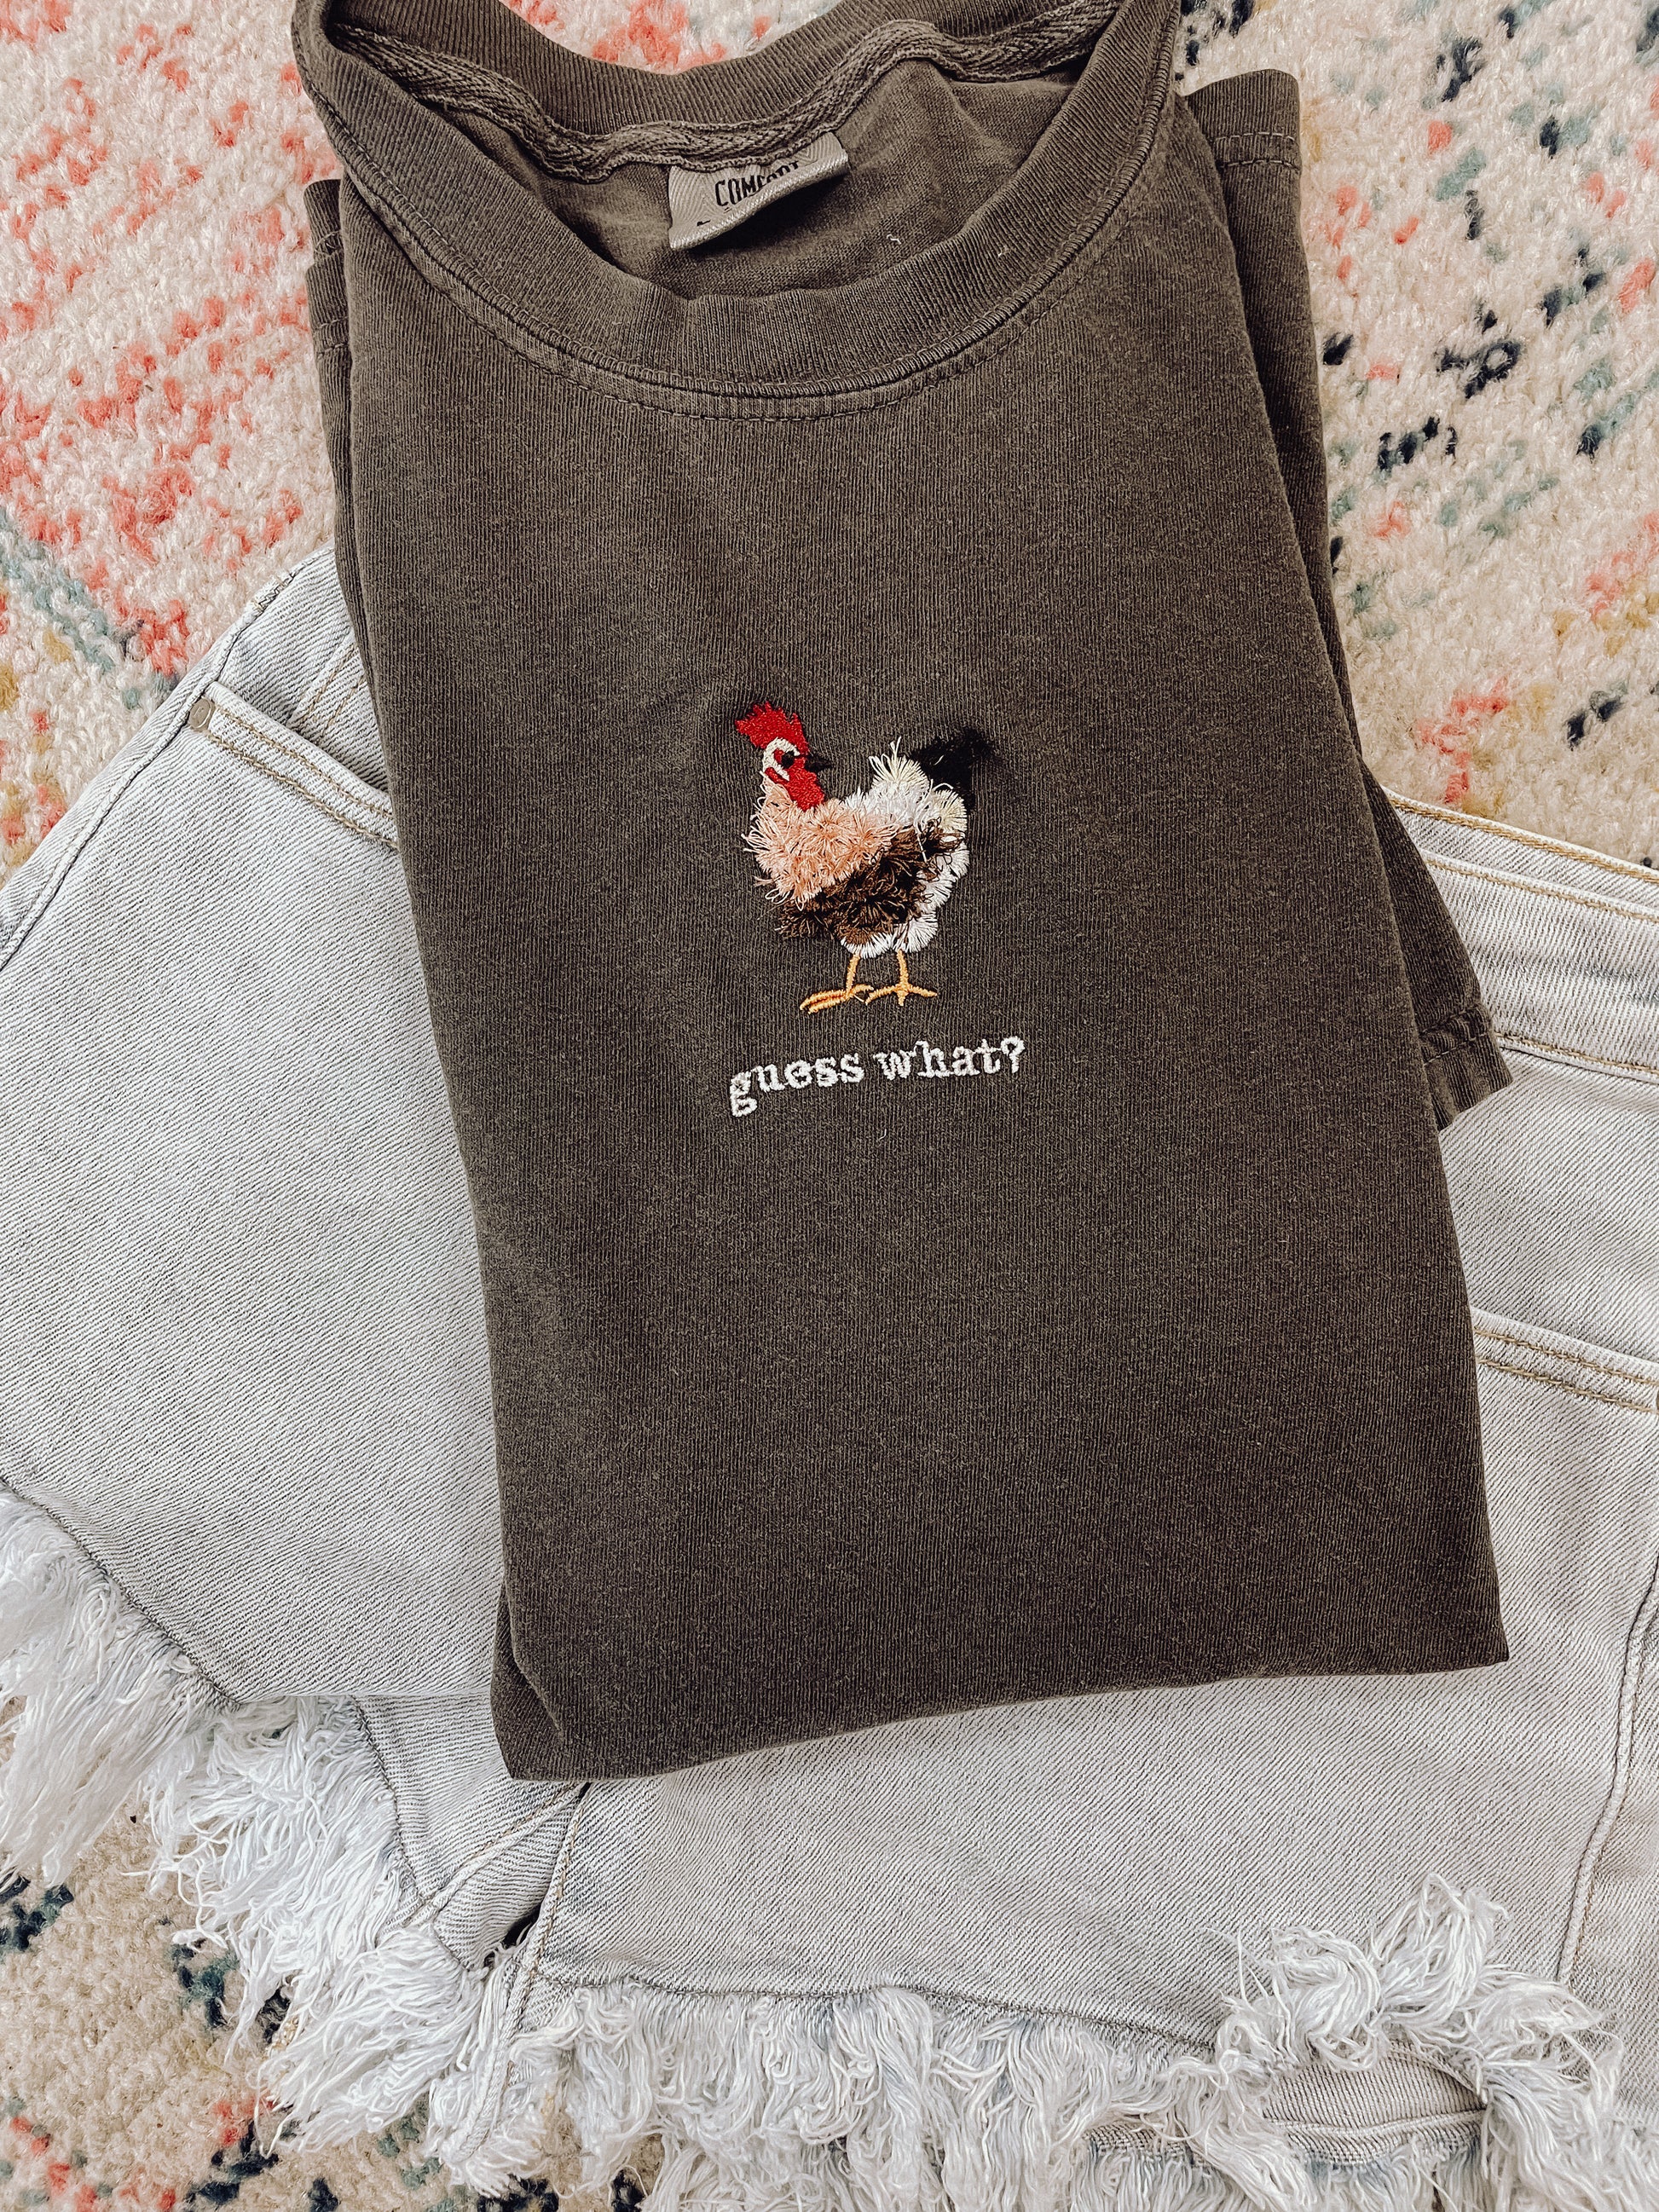 Goose Bumps Embroidered Tee